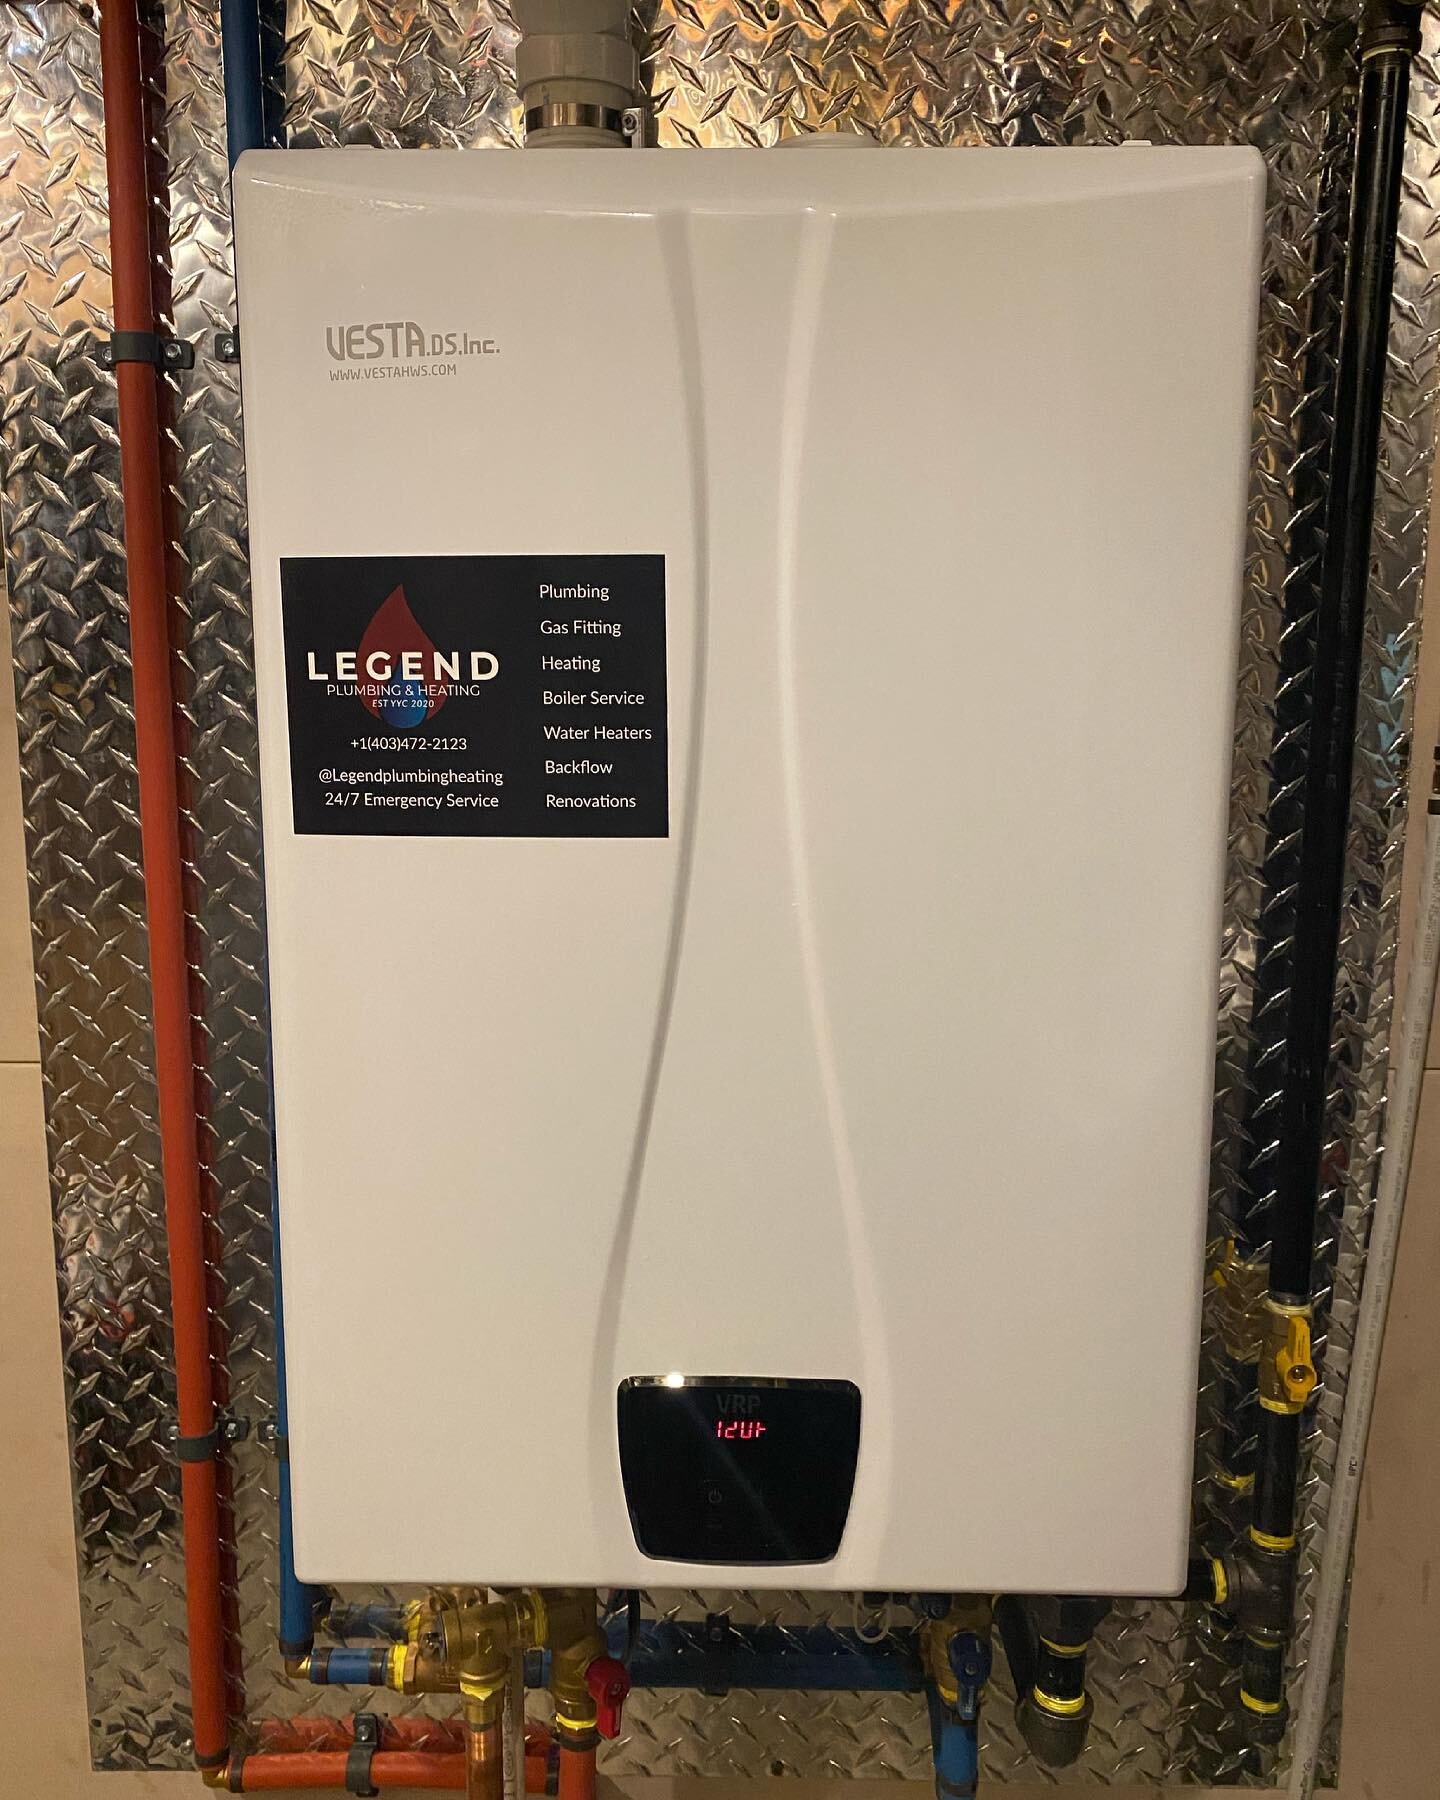 Check out this tankless water heater install!

&bull;Endless hot water ✅ 
&bull;Energy efficient ✅ 
&bull;Frees up space in your mechanical room ✅ 
&bull;Lasts much longer than traditional hot water tanks ✅ 
&bull;Looks bad ass ✅